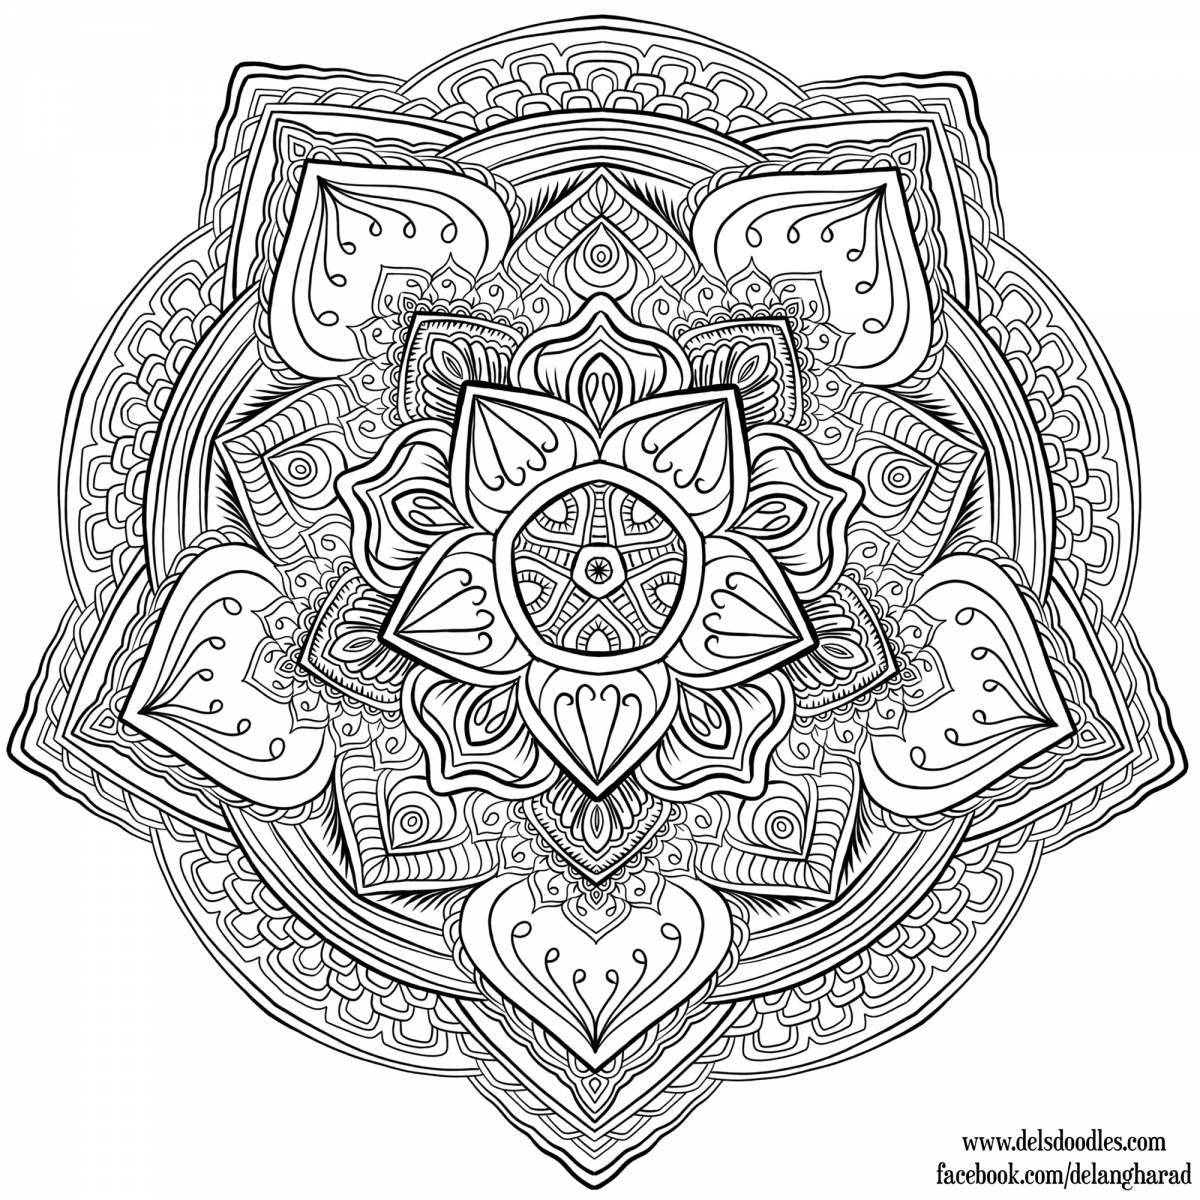 Blissful coloring mandala of peace and tranquility